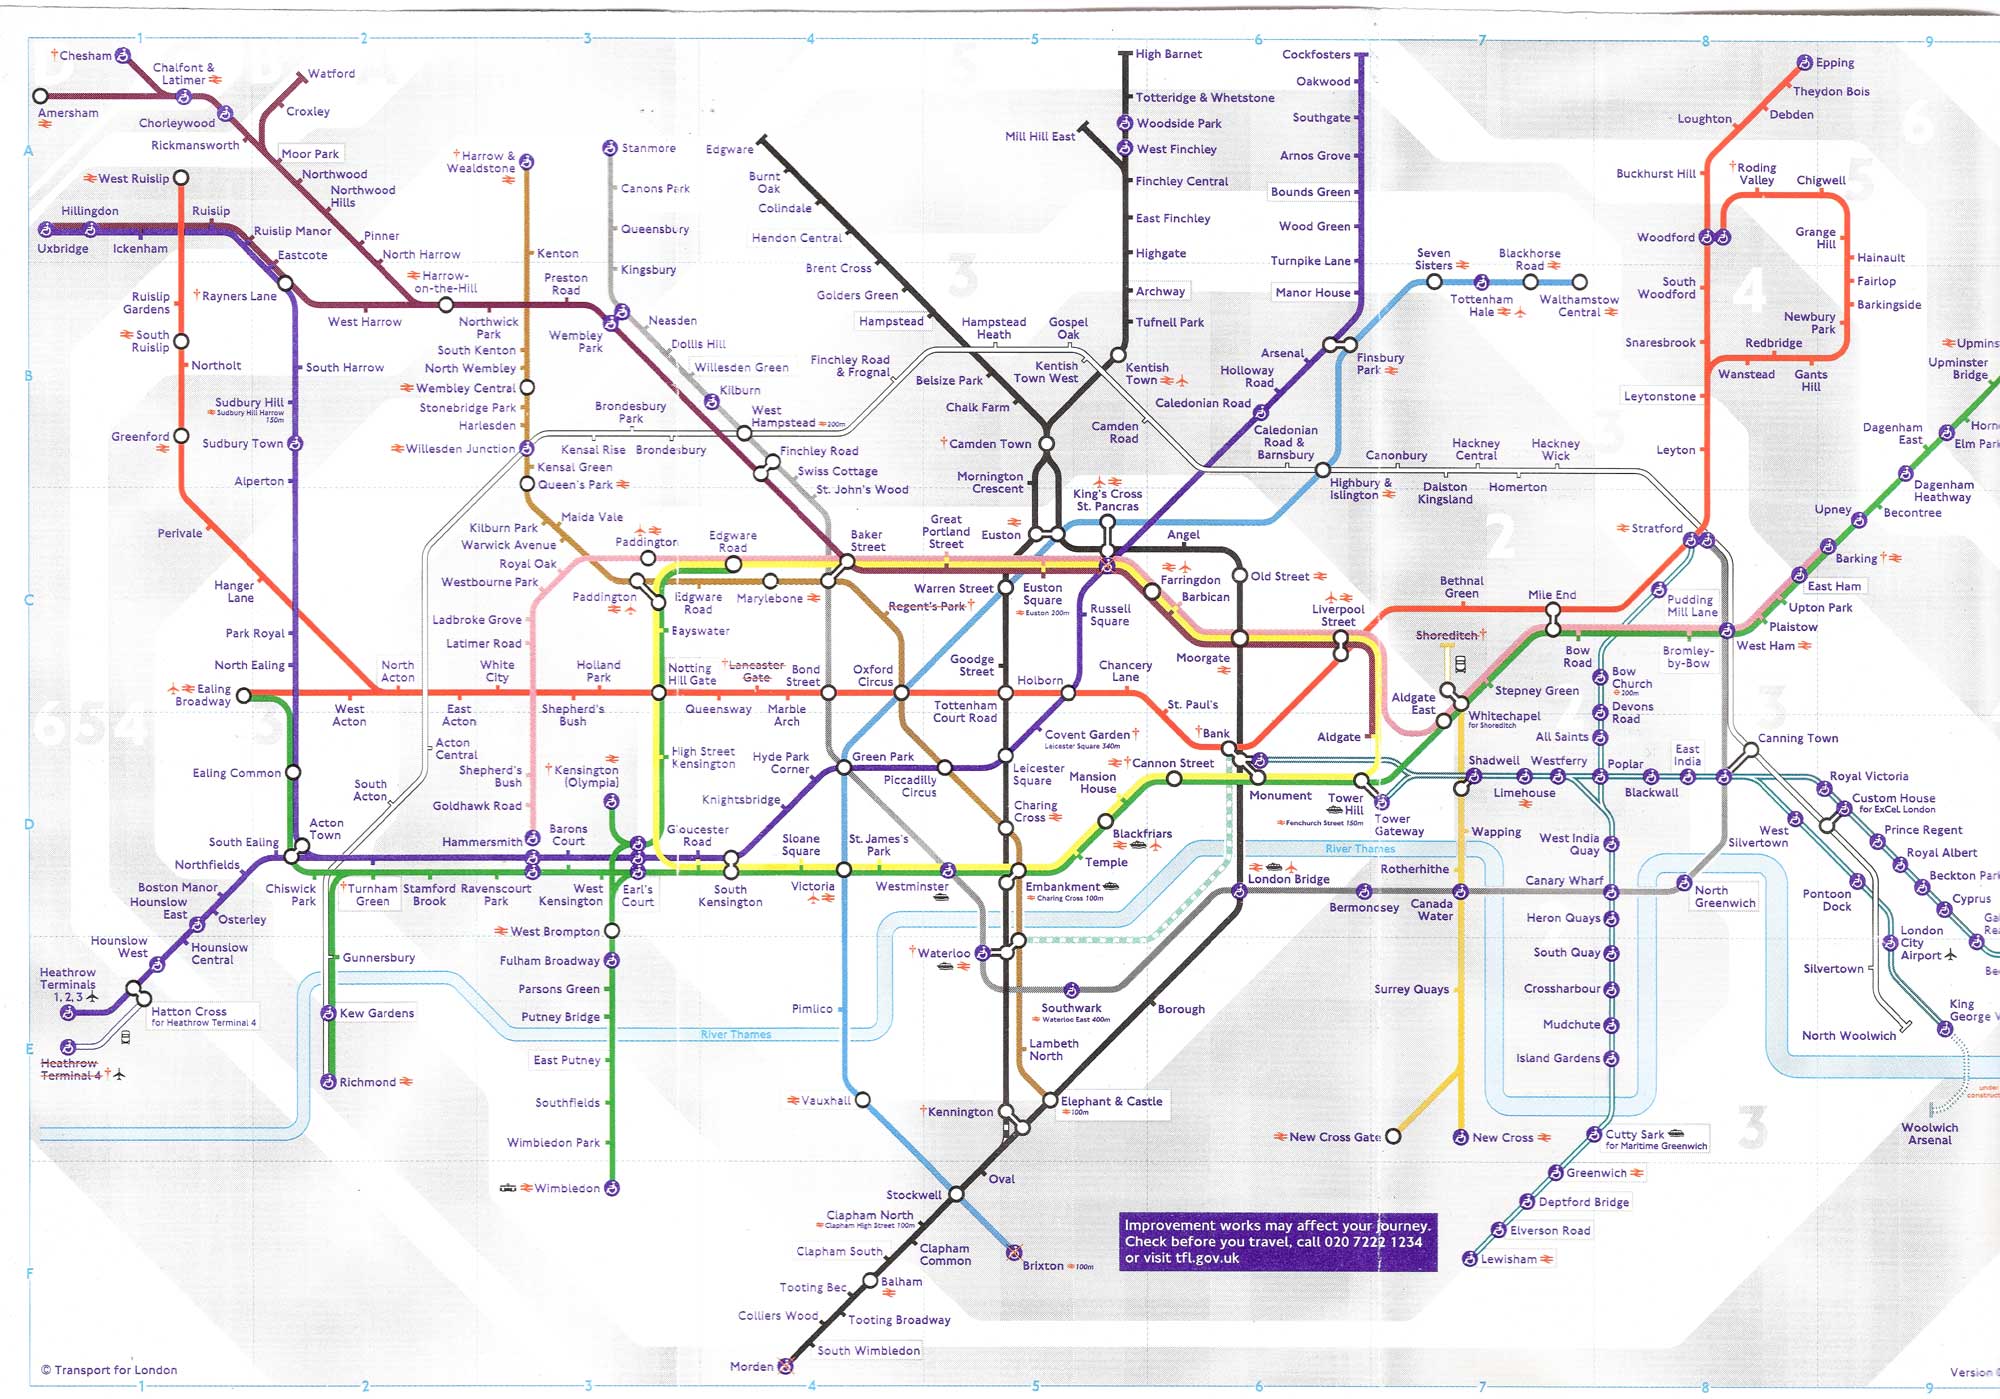 Travel guide for England, London Underground (the tube) Map